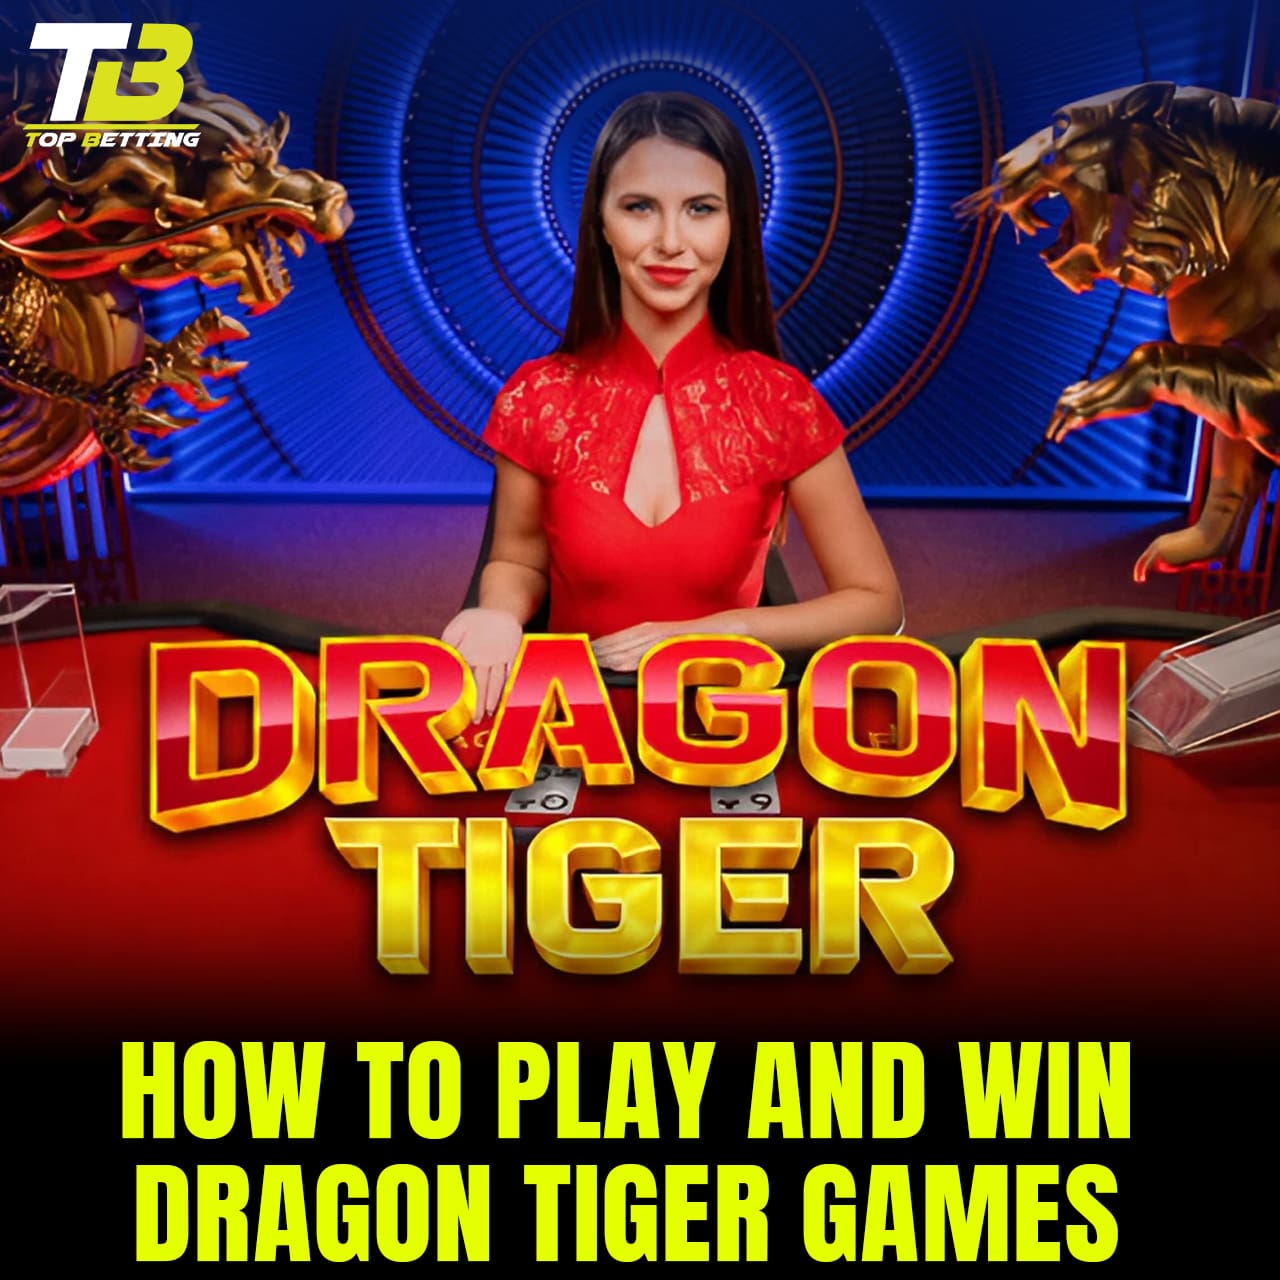 How to play and win dragon tiger games.